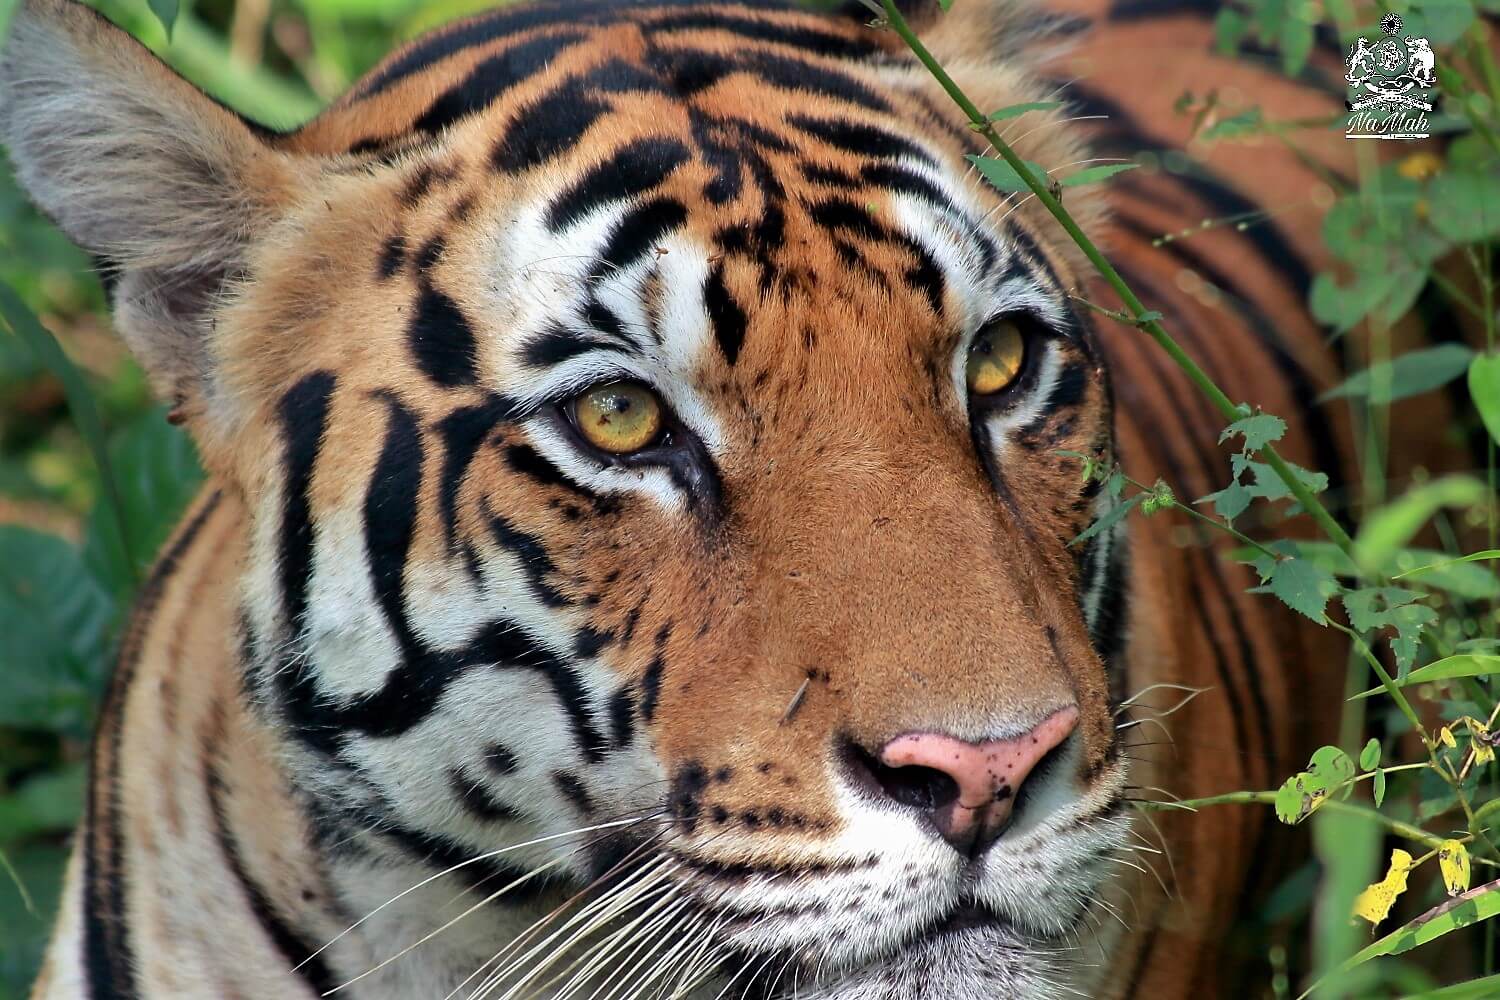 Tiger close up portrait photograph from Kanha National Park
